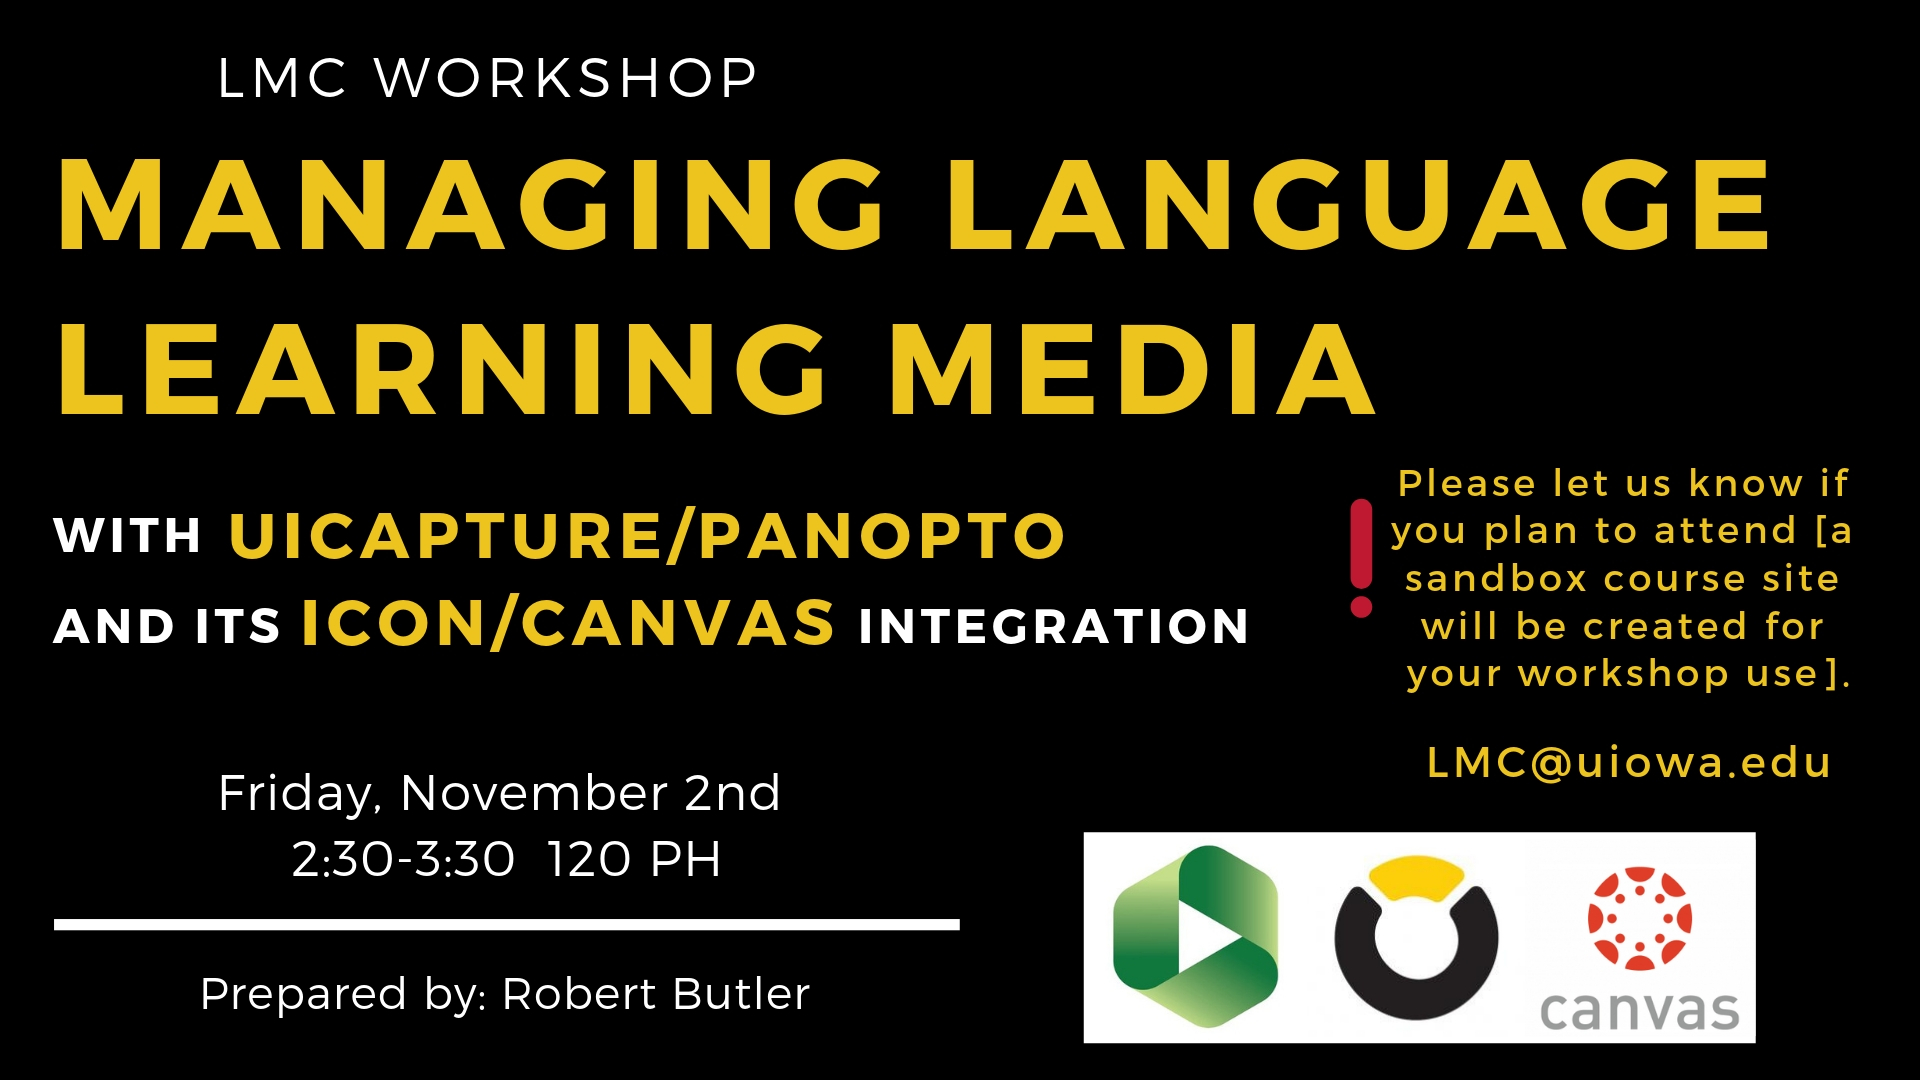 Please join us for an LMC workshop on managing language learning media with UICapture/Panopto and its ICON/Canvas Integration, on Friday, November 2nd, from 2:30 p.m.-3:30p.m., in 120 PH [LMC ITC]. We will introduce UICapture/Panopto, a university supported media management and lecture capture tool, that is integrated with ICON/Canvas, and that can be used to create and manage course media for both instructors and students. This session will focus on the fundamentals of classroom/coursesite integration, while a second session [to be scheduled later in the semester] will provide a more in depth look of some of its additional capabilities, such as Editing, Quizzing and Captioning.   We will also discuss some examples of how instructors in the DWLLC have been using this tool for teaching, assessment and research. This presentation and its tools are friendly to all languages offered in the DWLLC.   Individuals with disabilities are encouraged to attend all University of Iowa-sponsored events. If you are a person with a disability who requires a reasonable accommodation in order to participate in this workshop, please contact us in advance at LMC@uiowa.edu.   Please let us know if you plan to attend [a sandbox course site will be created for your workshop use].